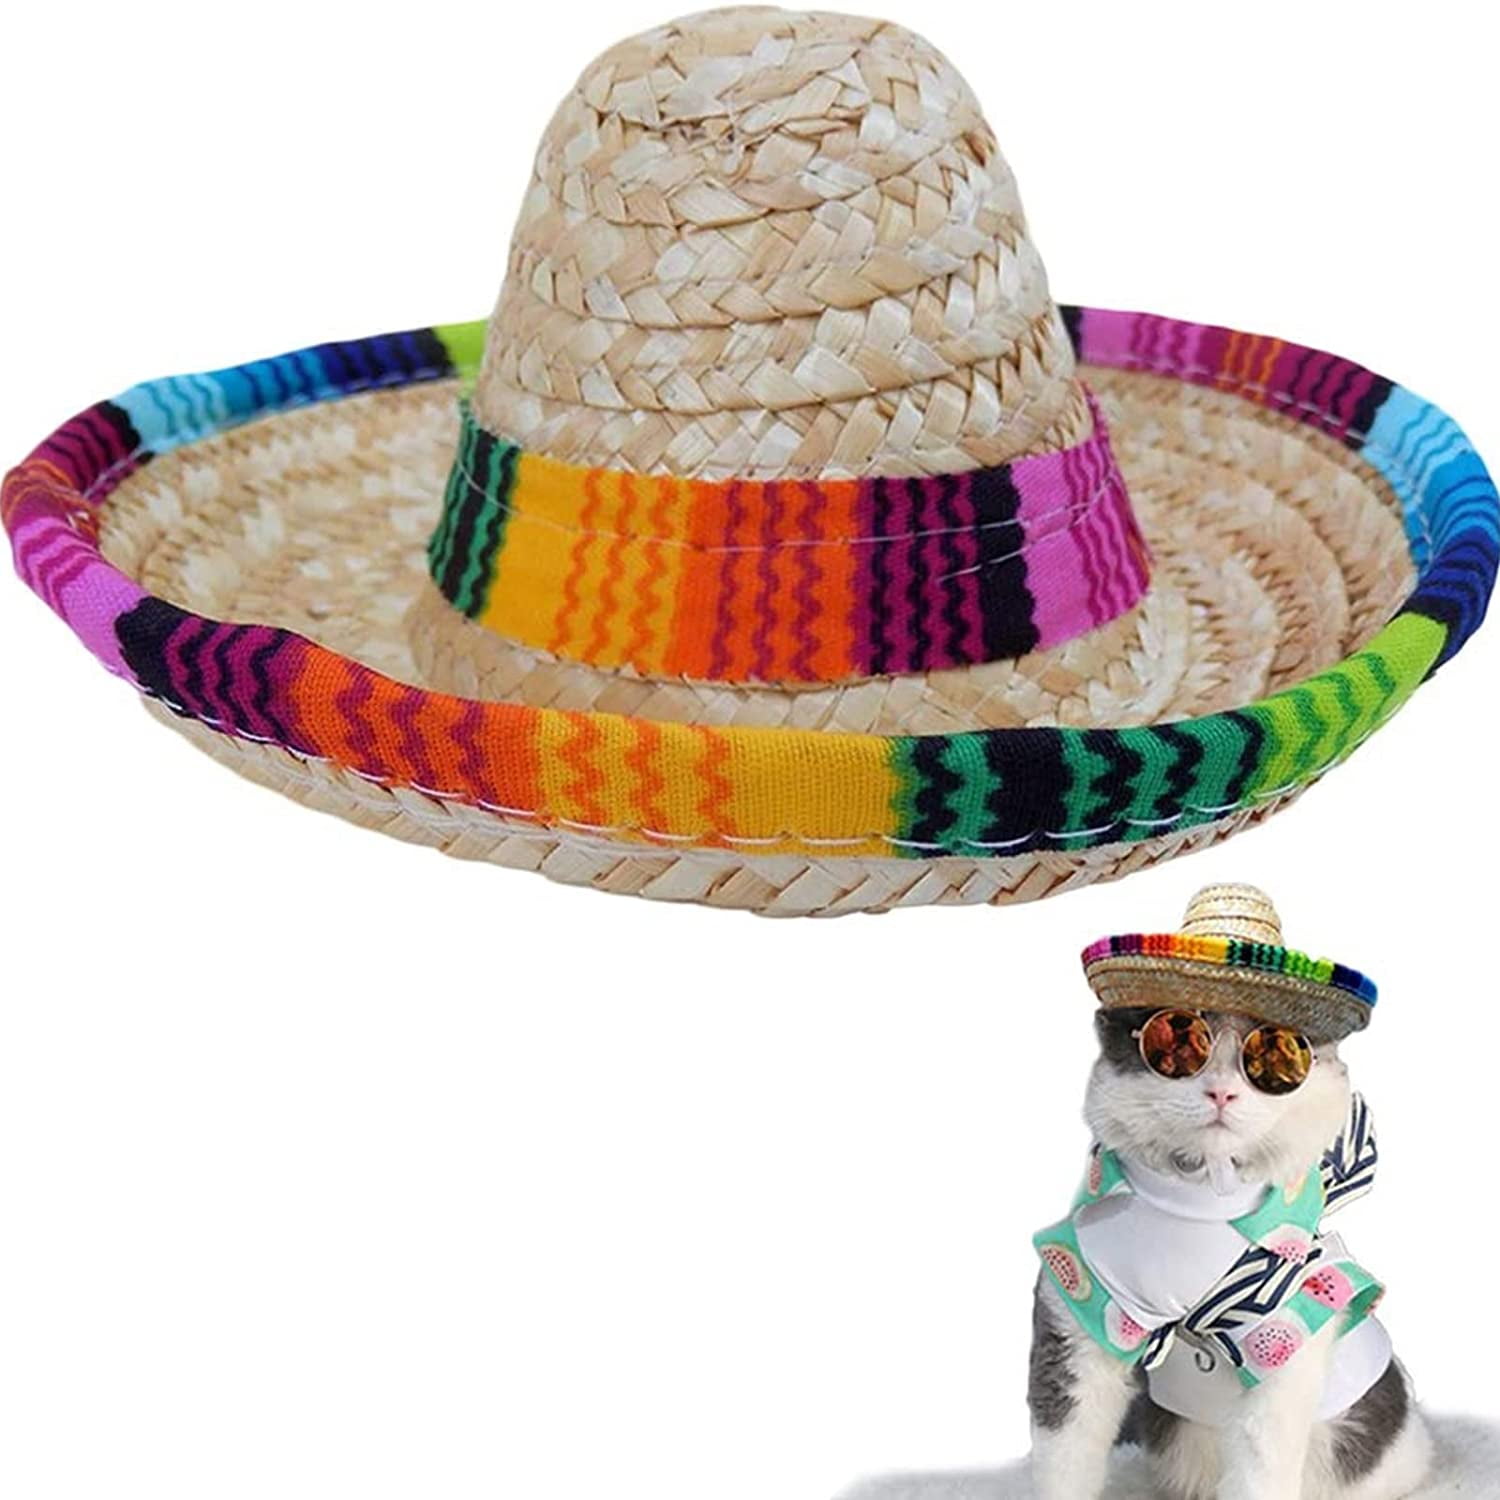 Yirtree Cat Mexican Hat Sombrero Handcrafted Woven Party Straw for Small Dog Pets Puppy -